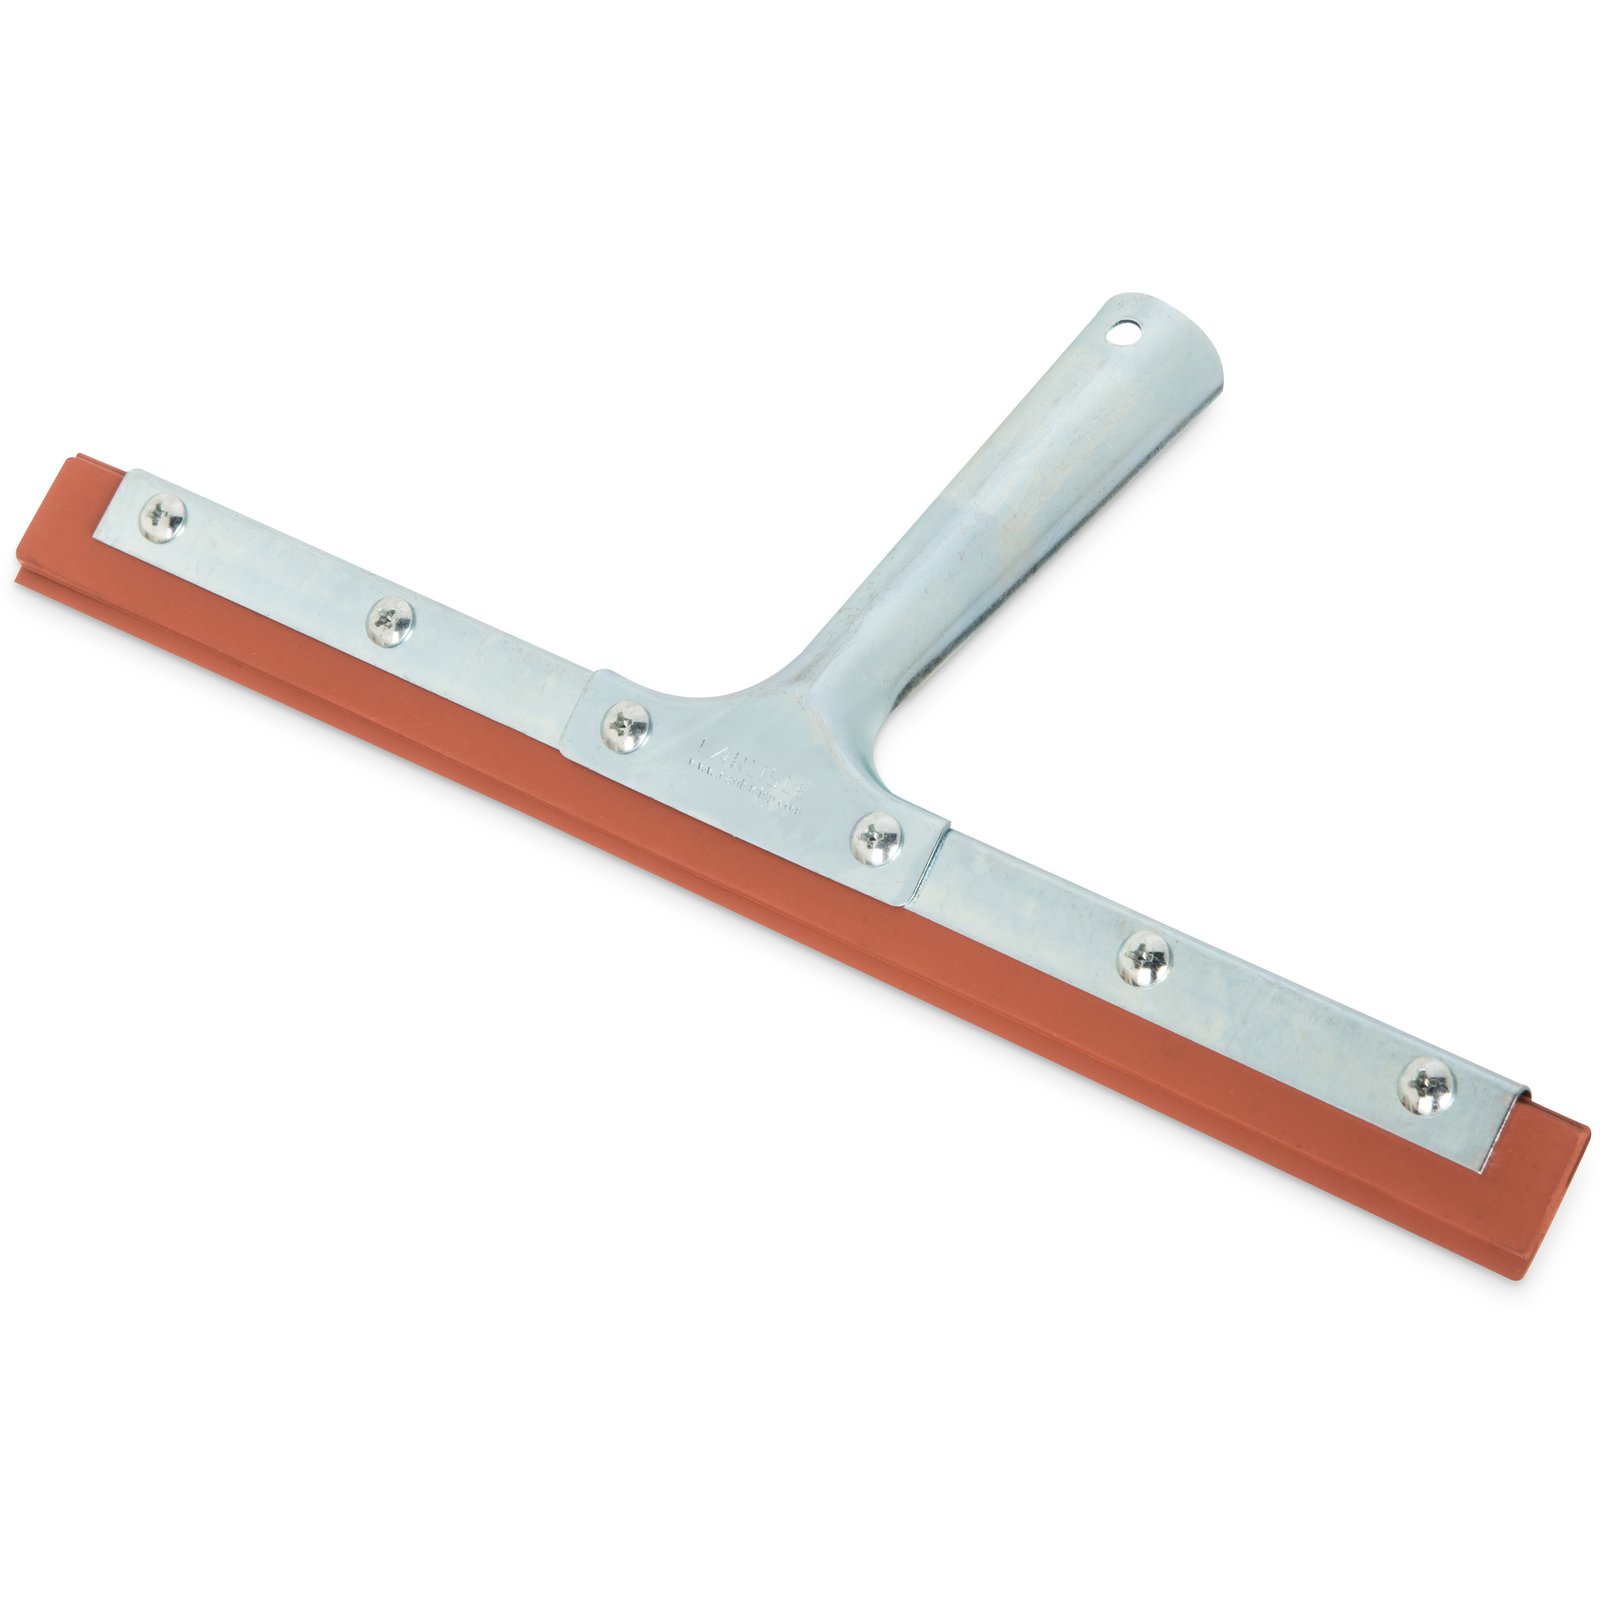 RICHMIRTH Silicone Rubber Blade Shower Squeegee 9 in Width Window